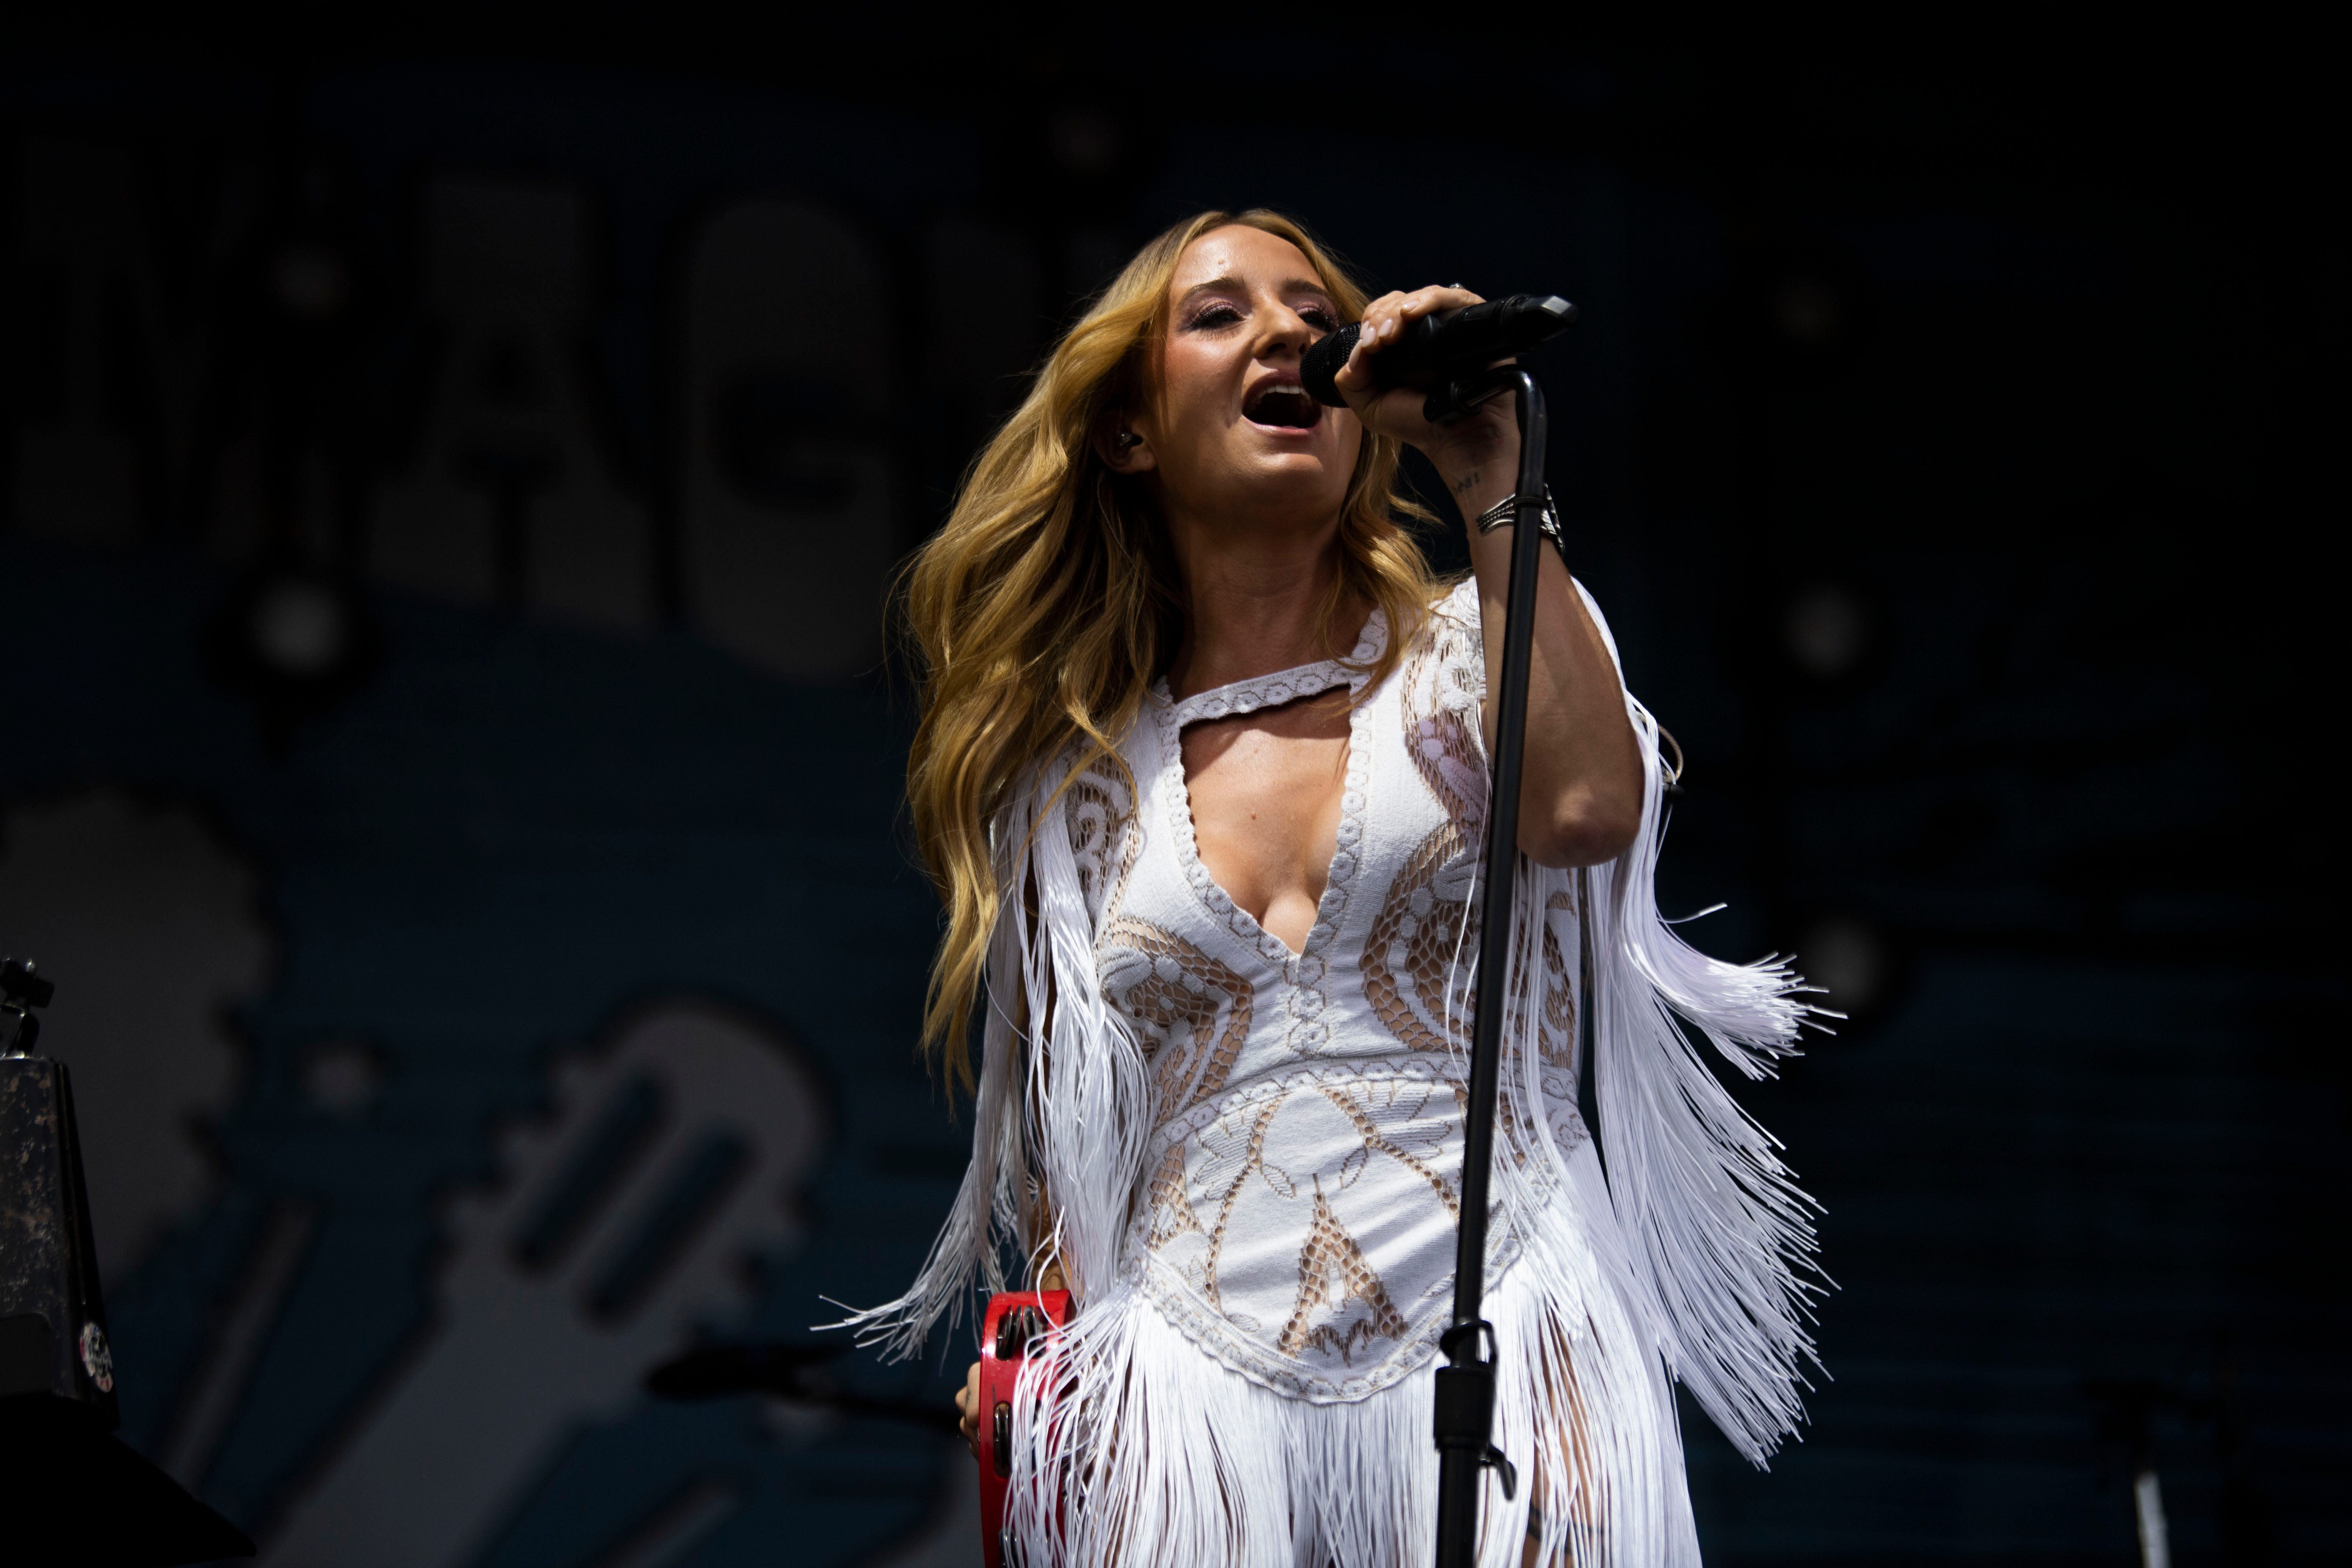 Margo Price details life-changing surgery, pressures for women in country. 'I felt broken from the start'